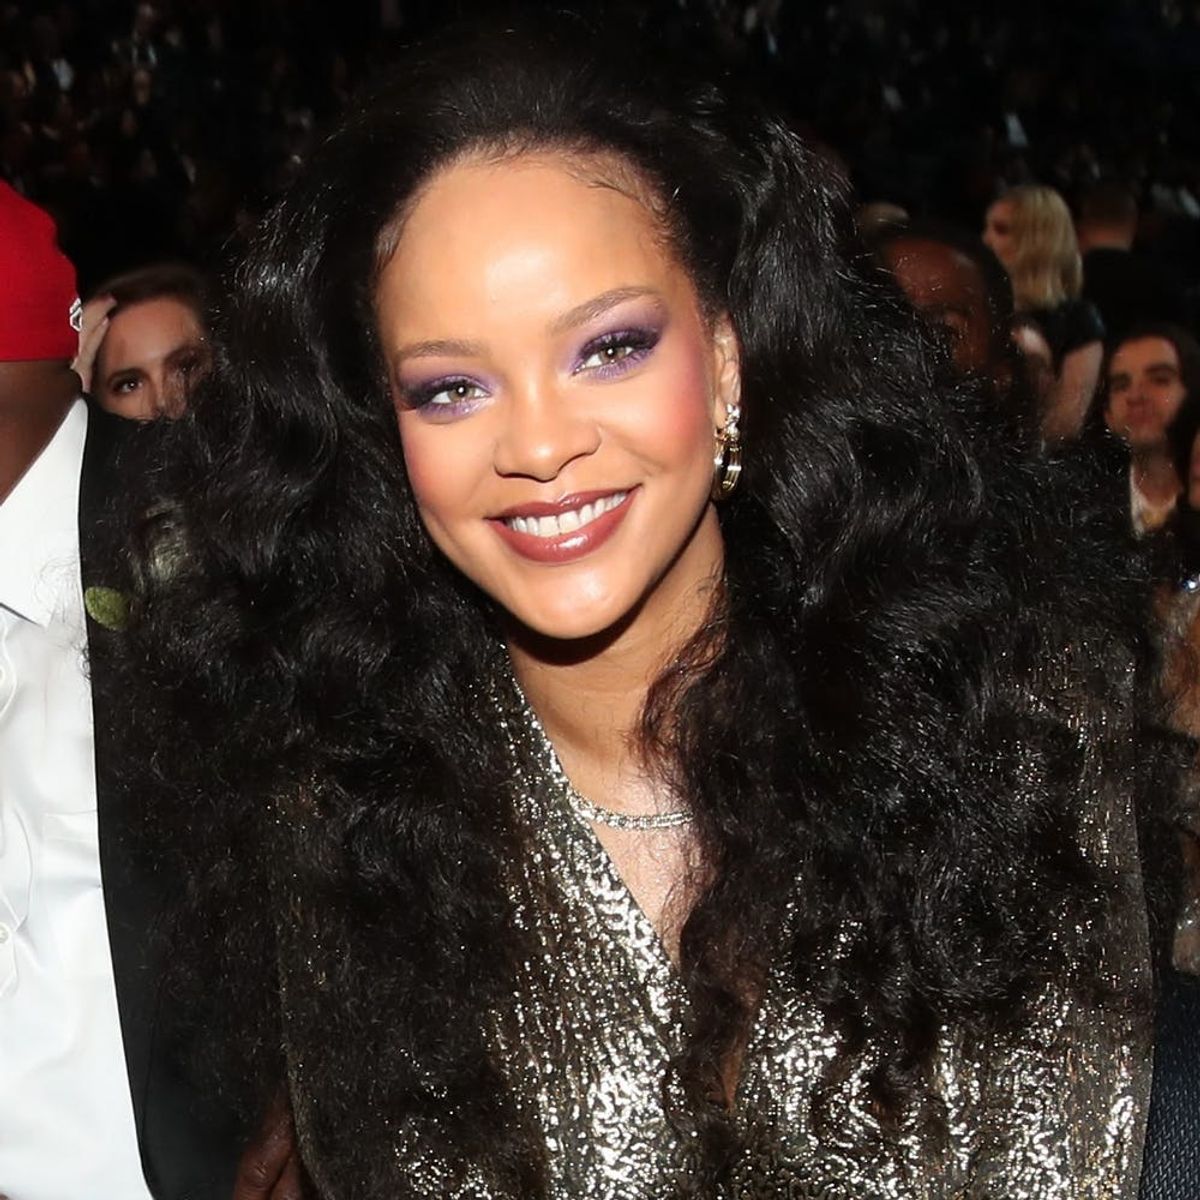 Rihanna’s Grammys Gown Was Made Up of More Than 275,000 Crystals